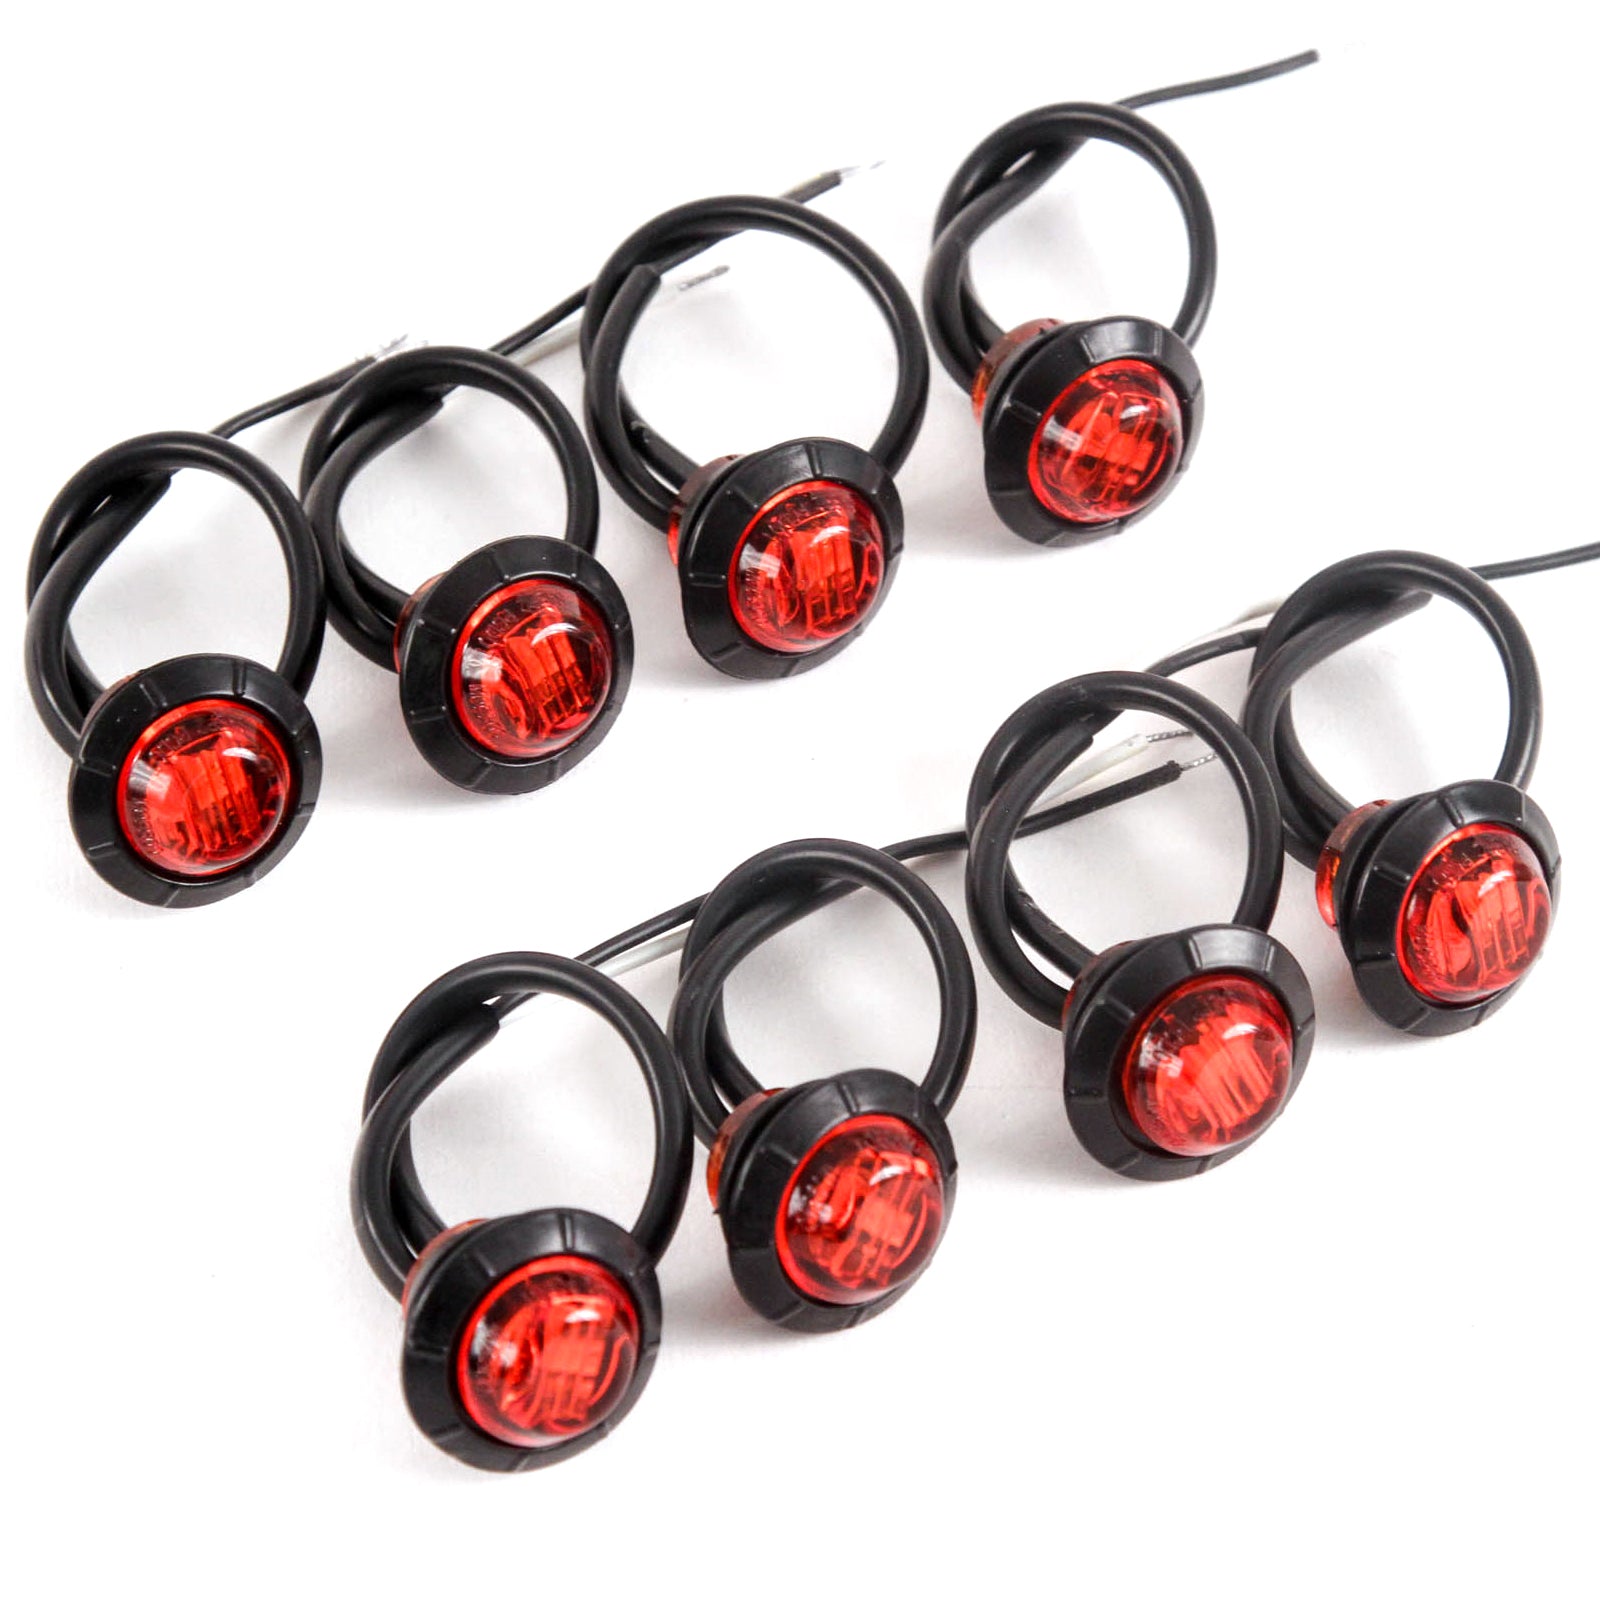 (8) 3/4 Inches Red LED Clearance Side Marker Lights Truck Trailer Pickup Flush Mount